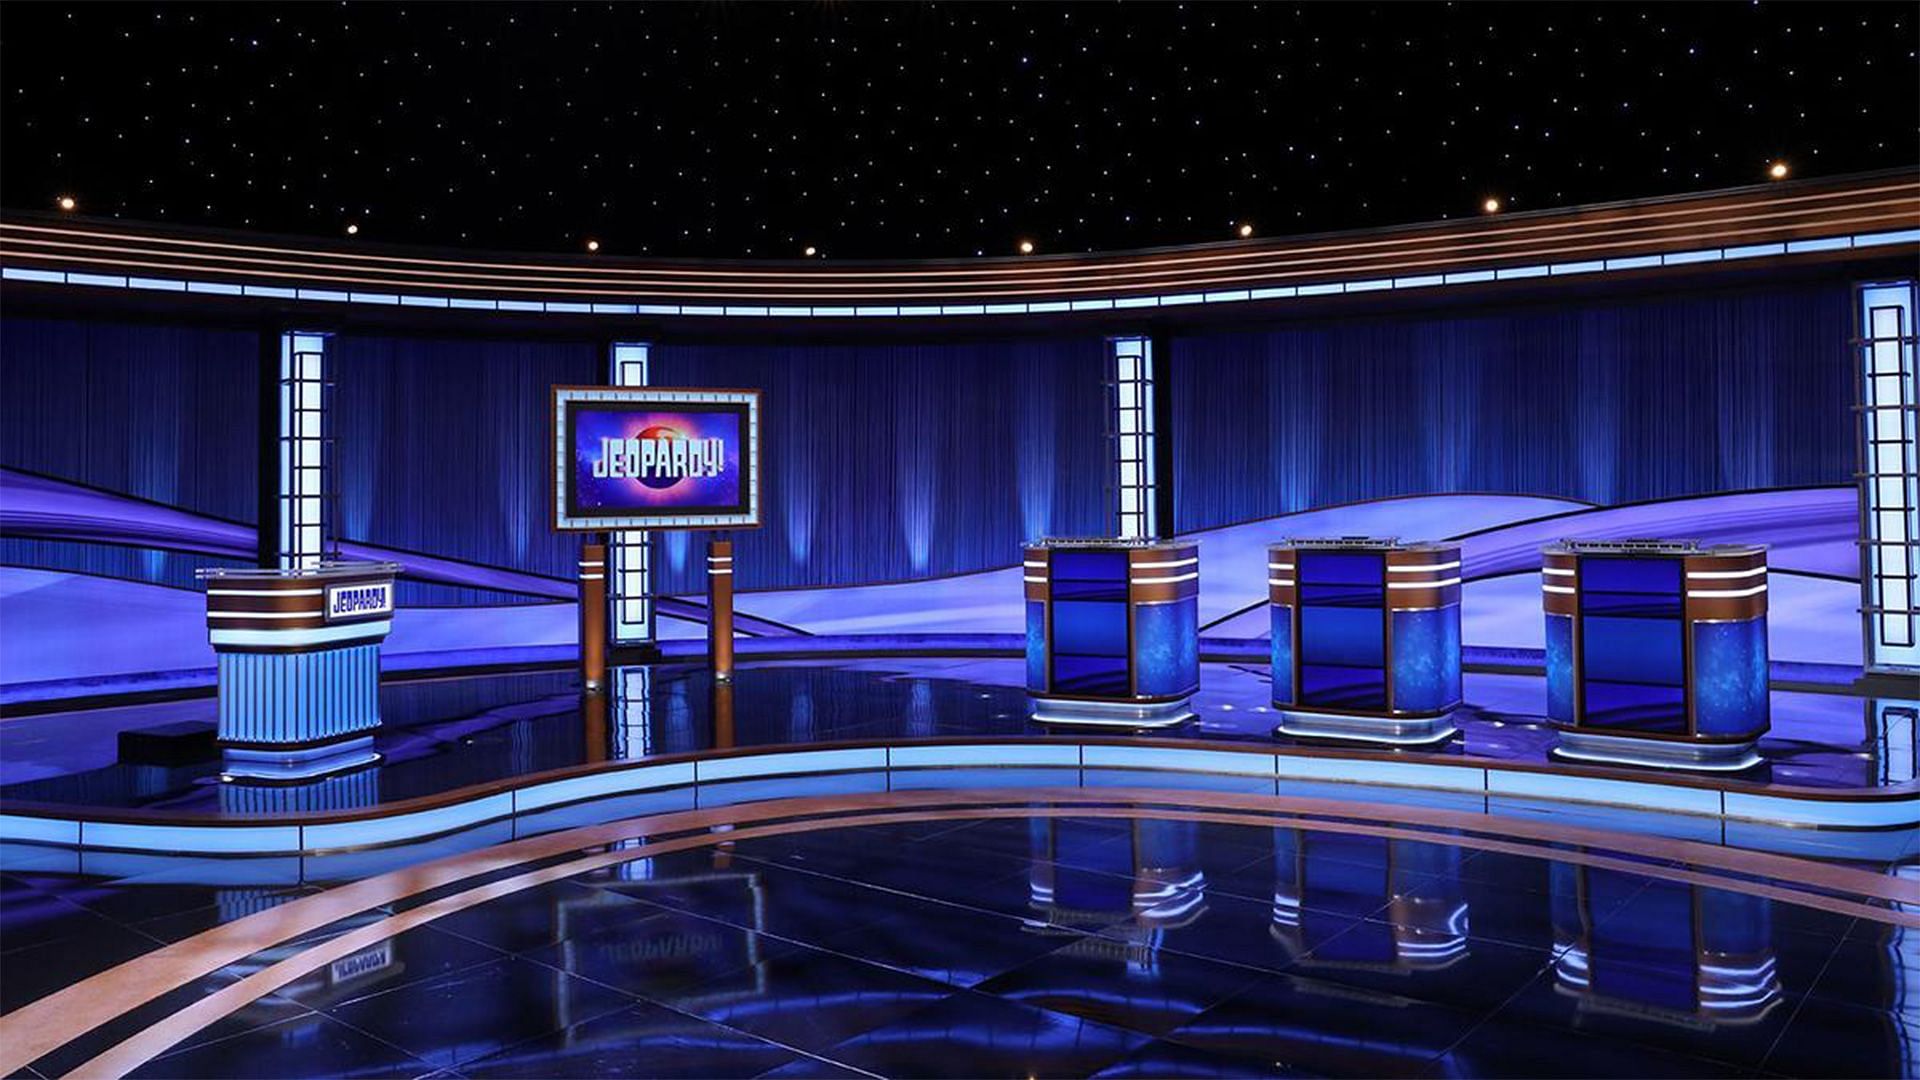 Today's Final Jeopardy! question, answer & contestants August 23